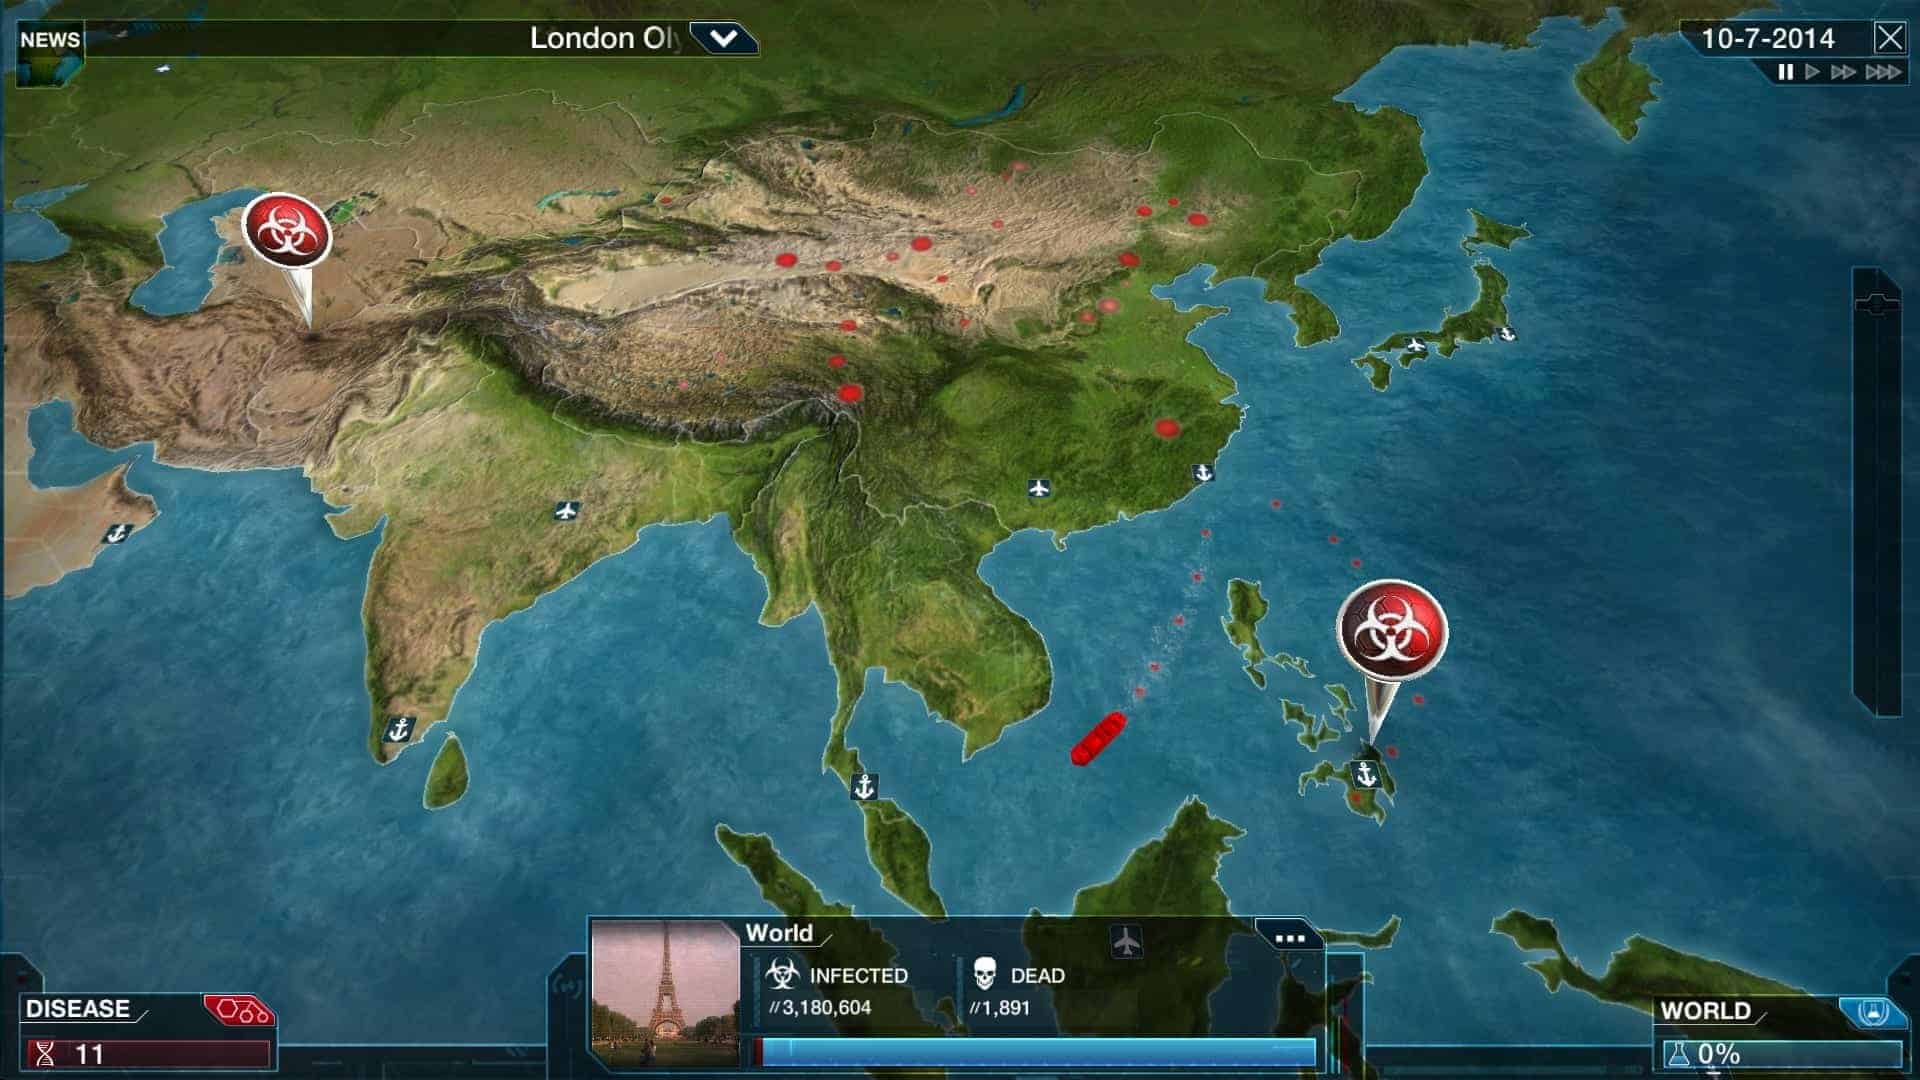 download the new version Plague Inc.